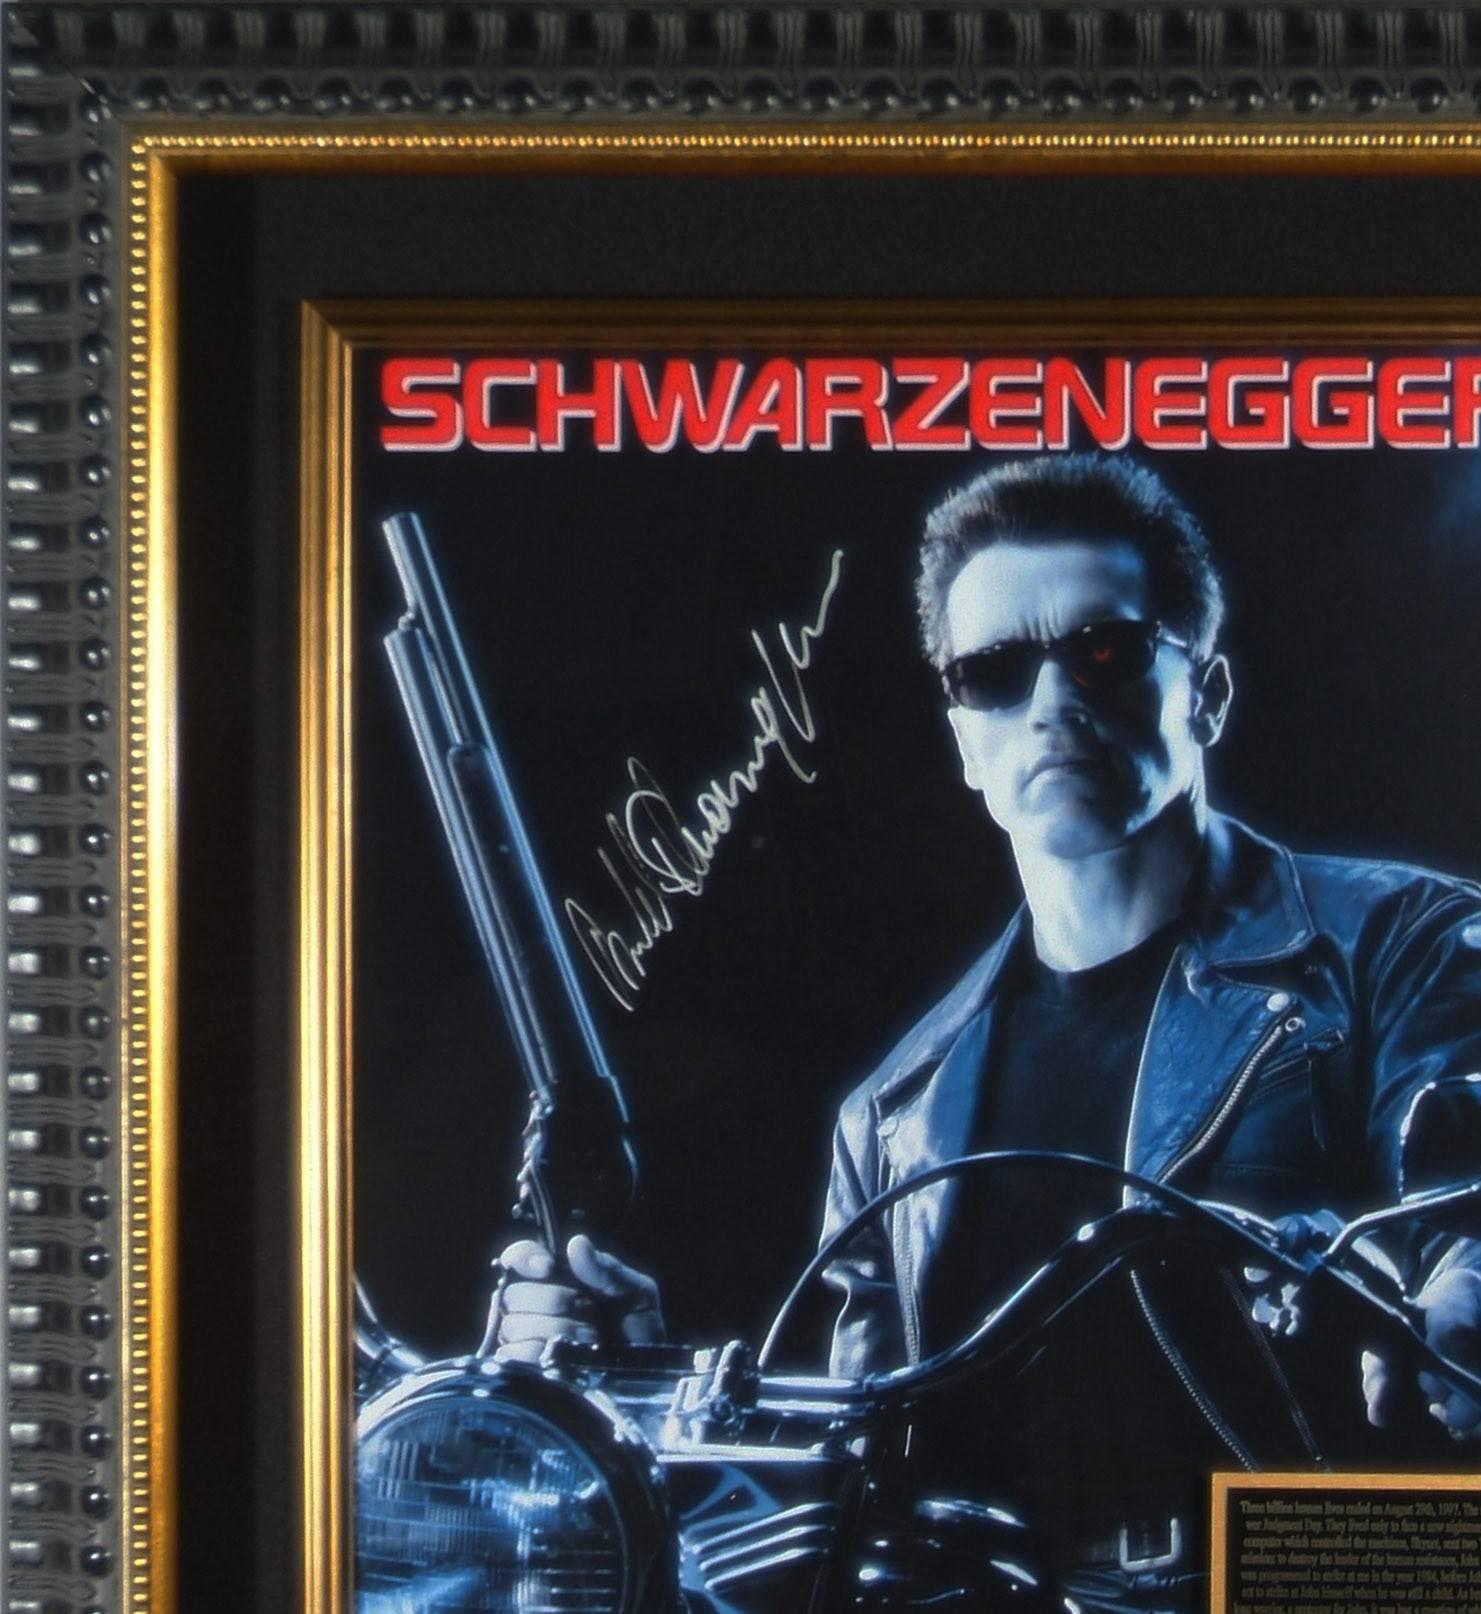 'Terminator 2' autographed movie poster framed memorabilia display 

• Featuring a 17.5 x 24” official 'Terminator 2: Judgement Day' movie poster
• Signed by Arnold Schwarzenegger
• Product weight: 12kg
• Frame dimensions: inches: 91 cm x 76